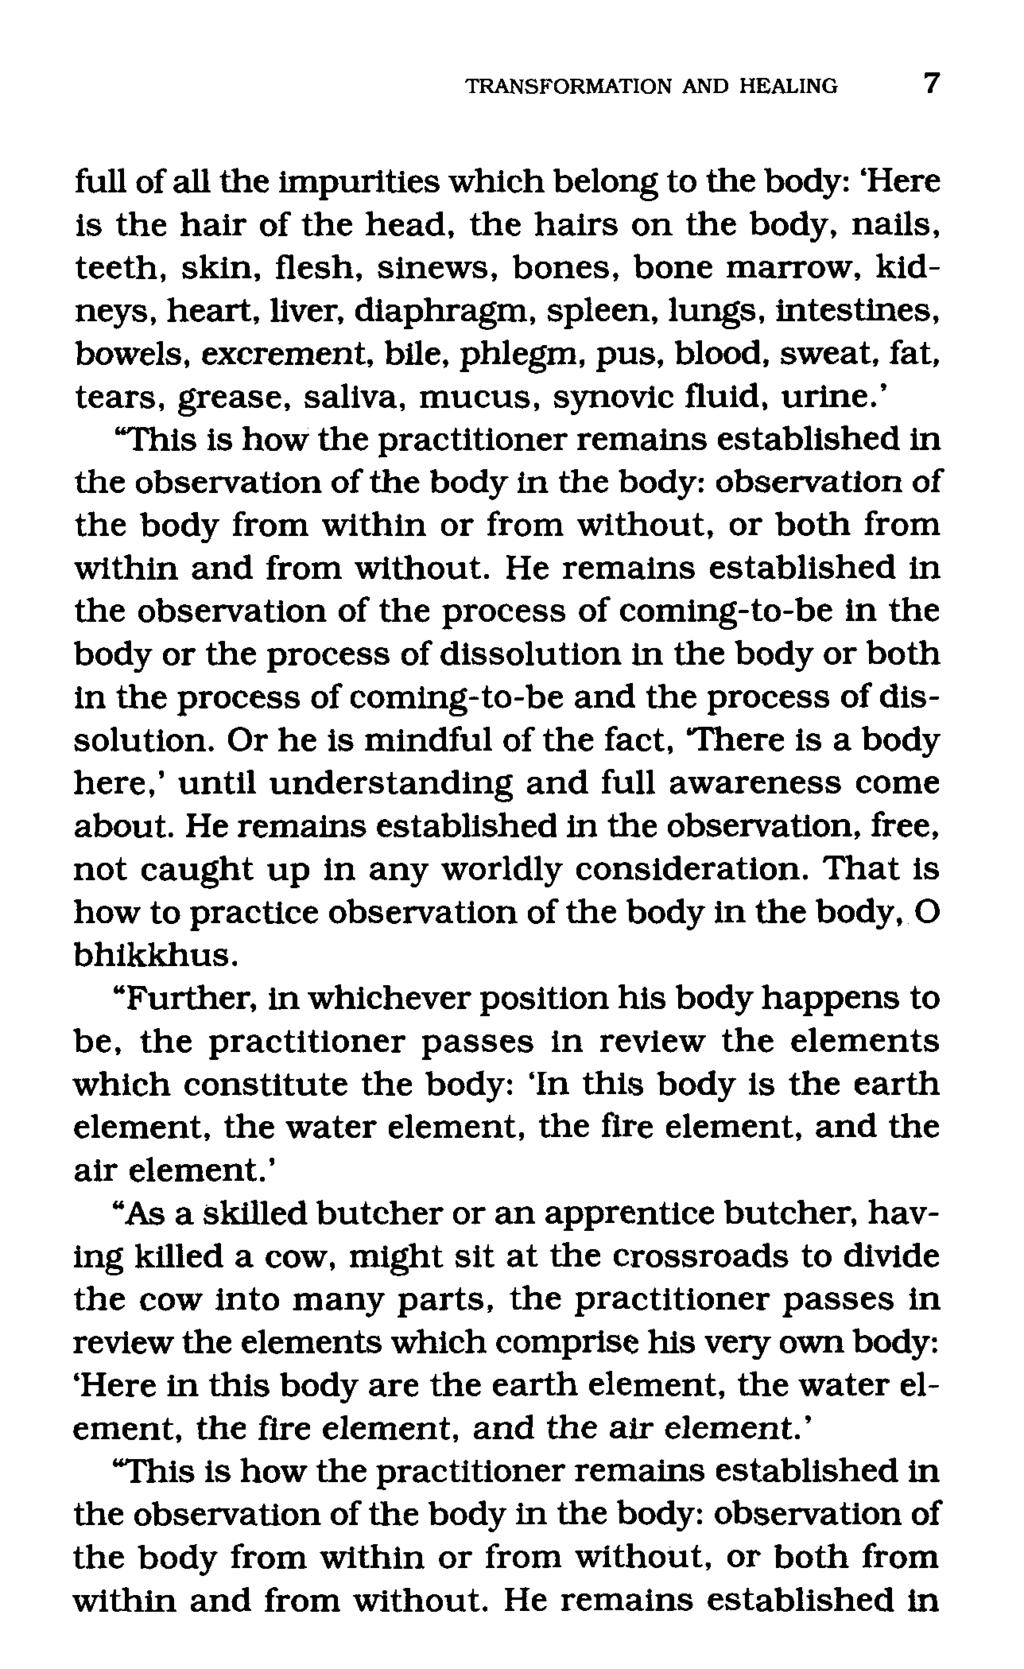 TRANSFORMATION AND HEALING 7 full of all the impurities which belong to the body: 'Here is the hair of the head, the hairs on the body, nails, teeth, skin, flesh, sinews, bones, bone marrow, kidneys,